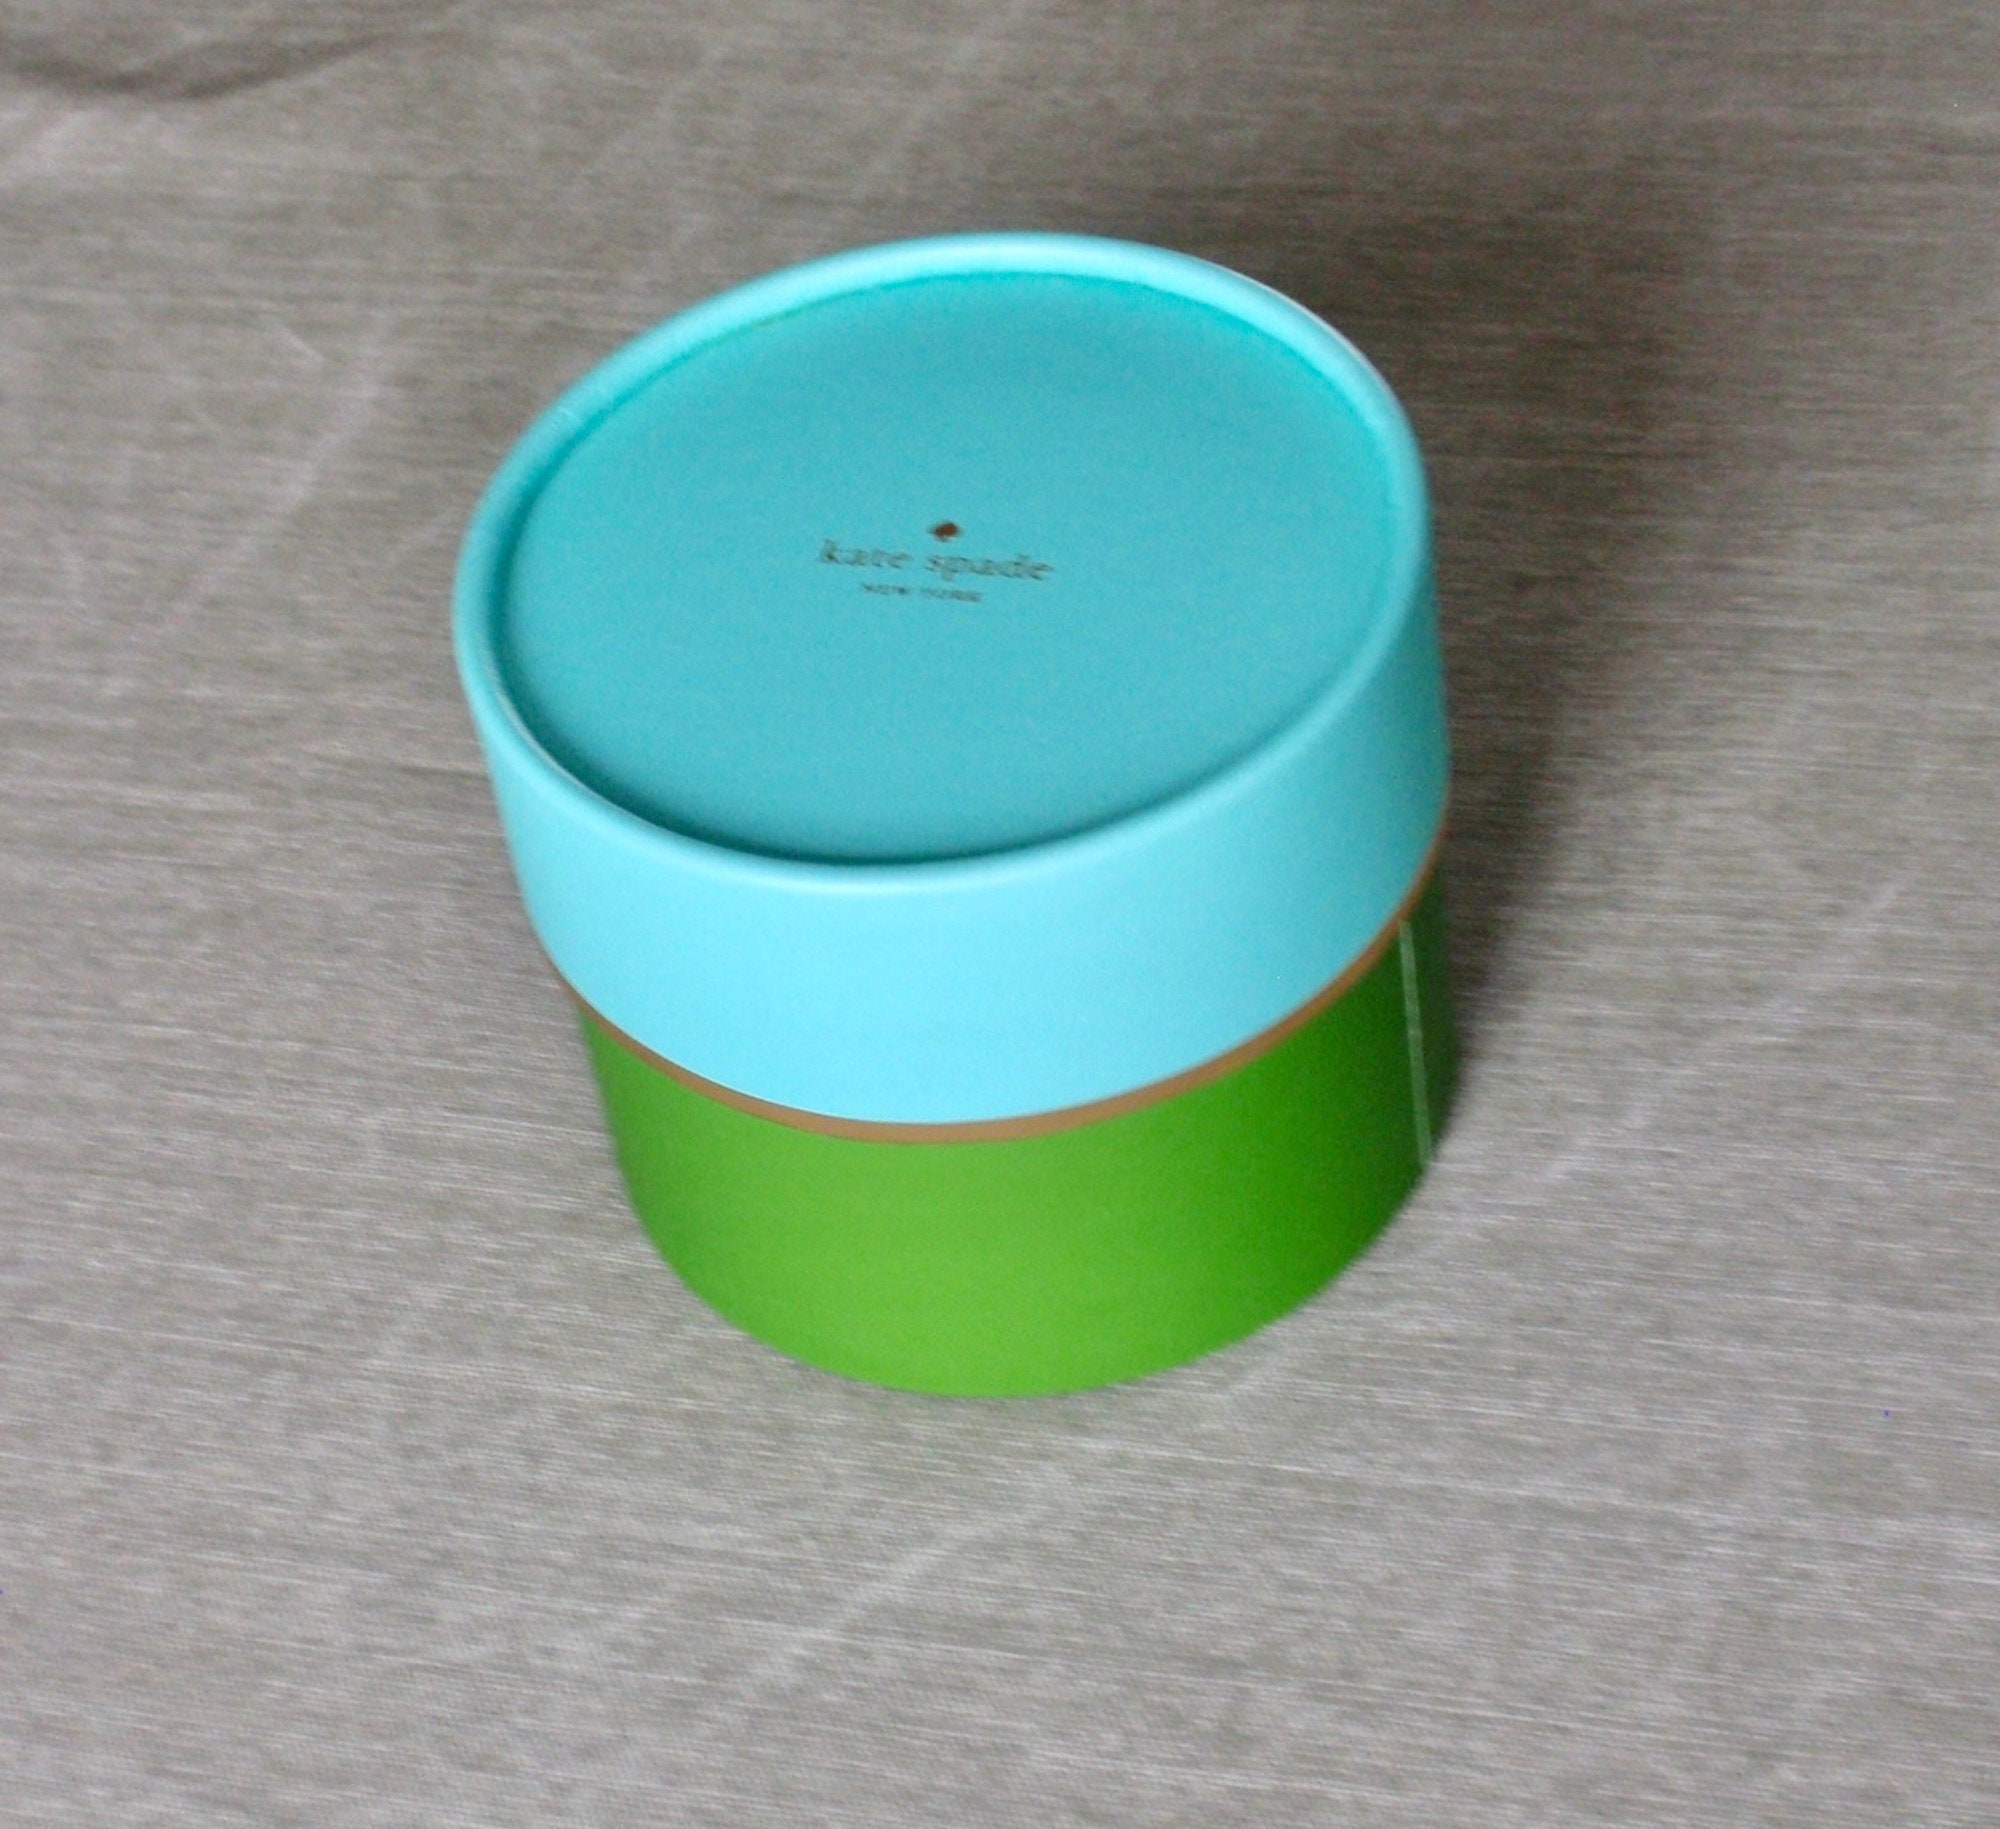 Kate Spade New York Round Gift Box Turquoise & Spring Green - Etsy